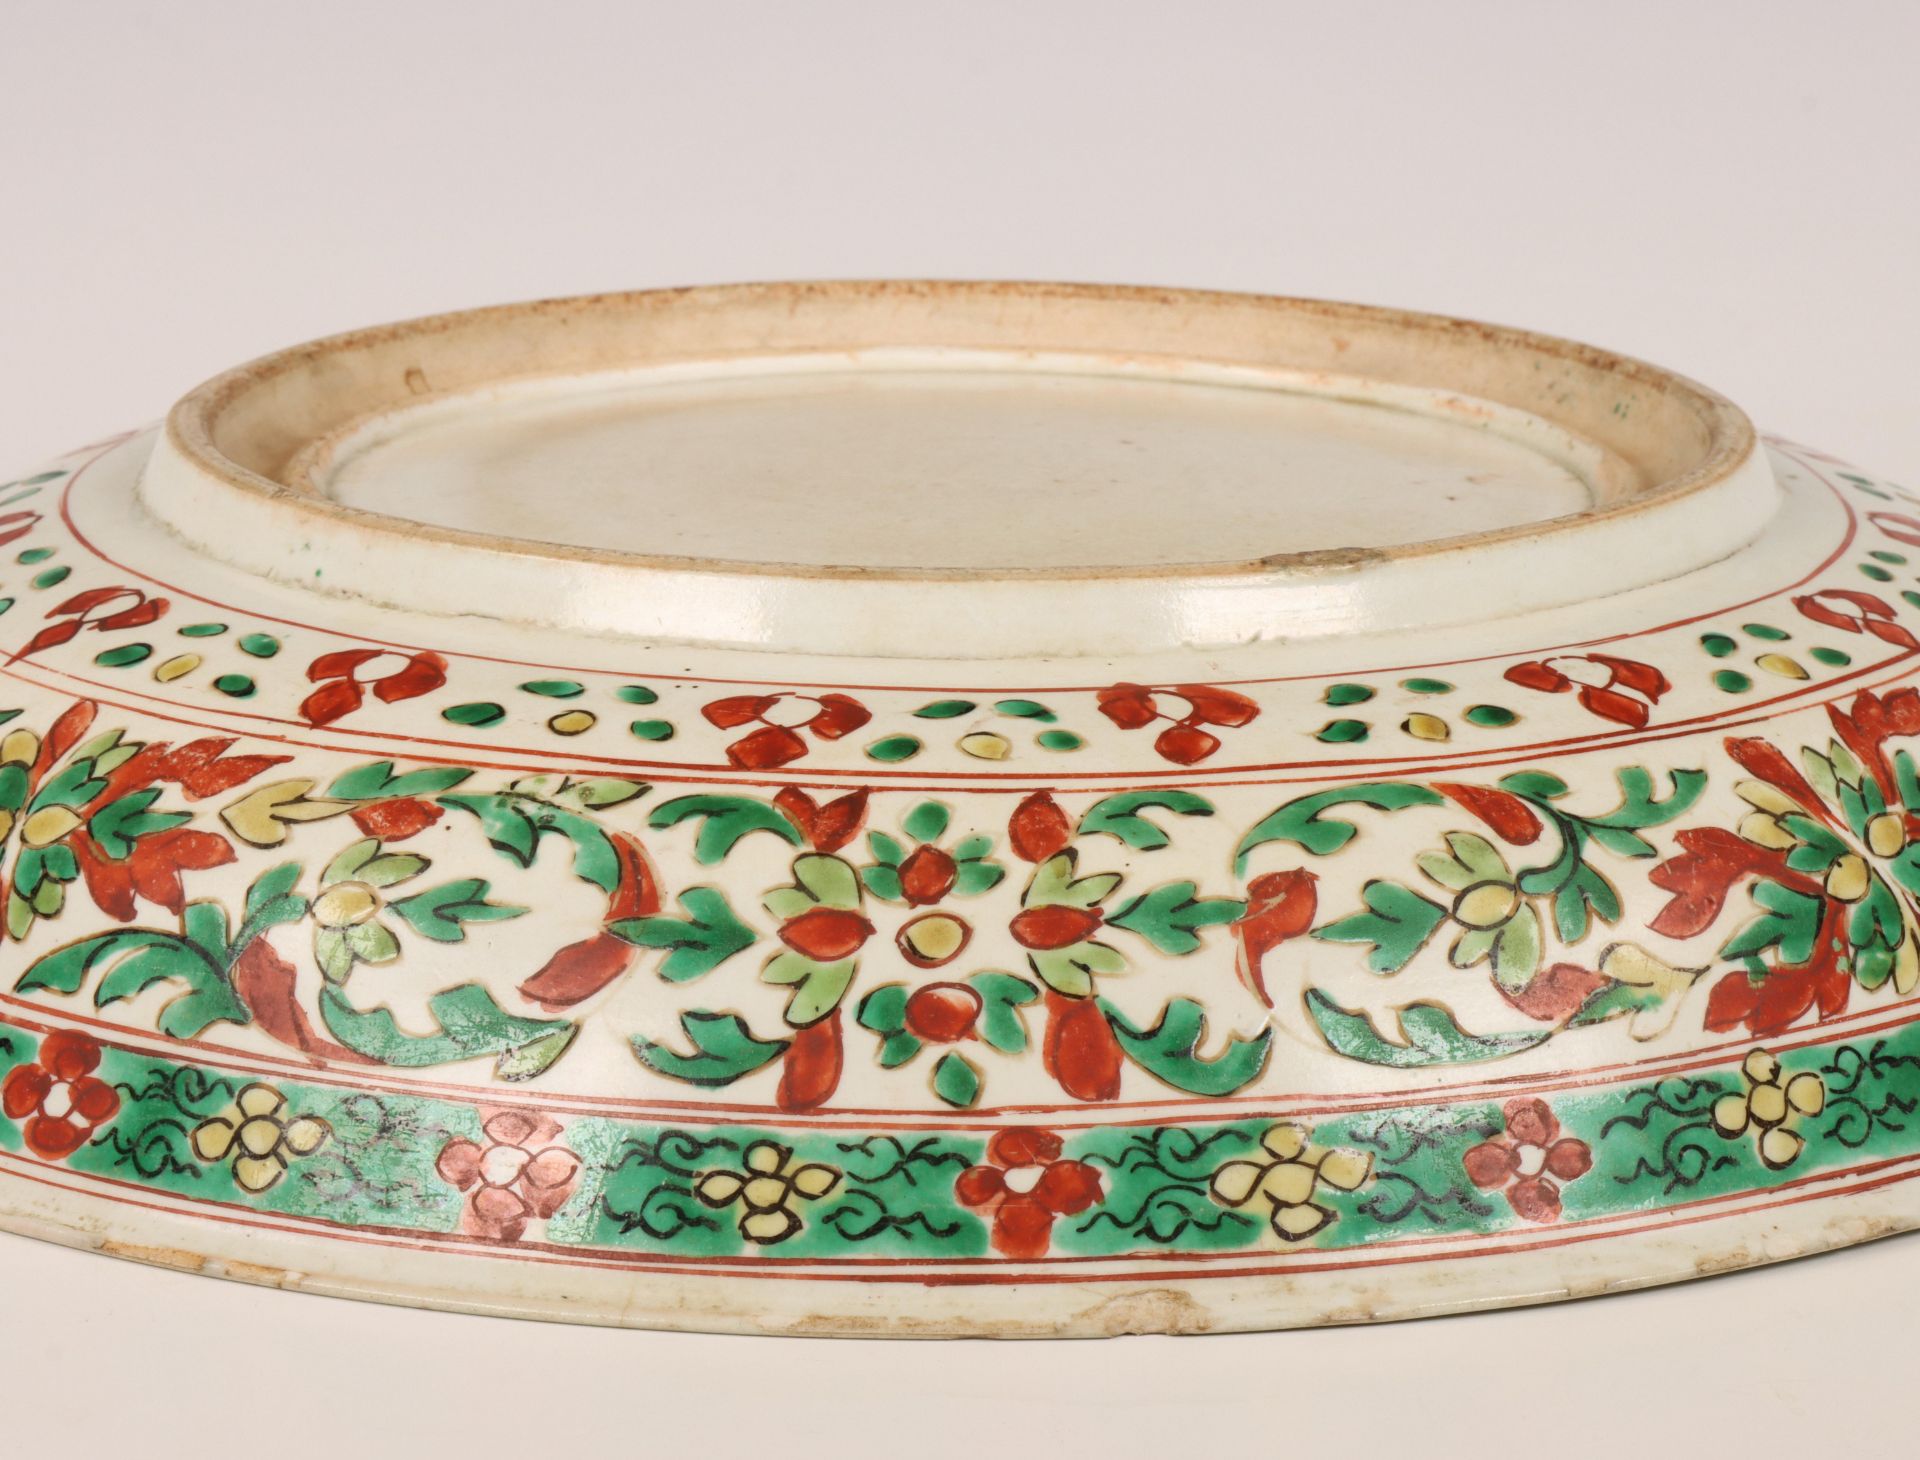 China, a famille verte porcelain dish, 19th century, - Image 3 of 4